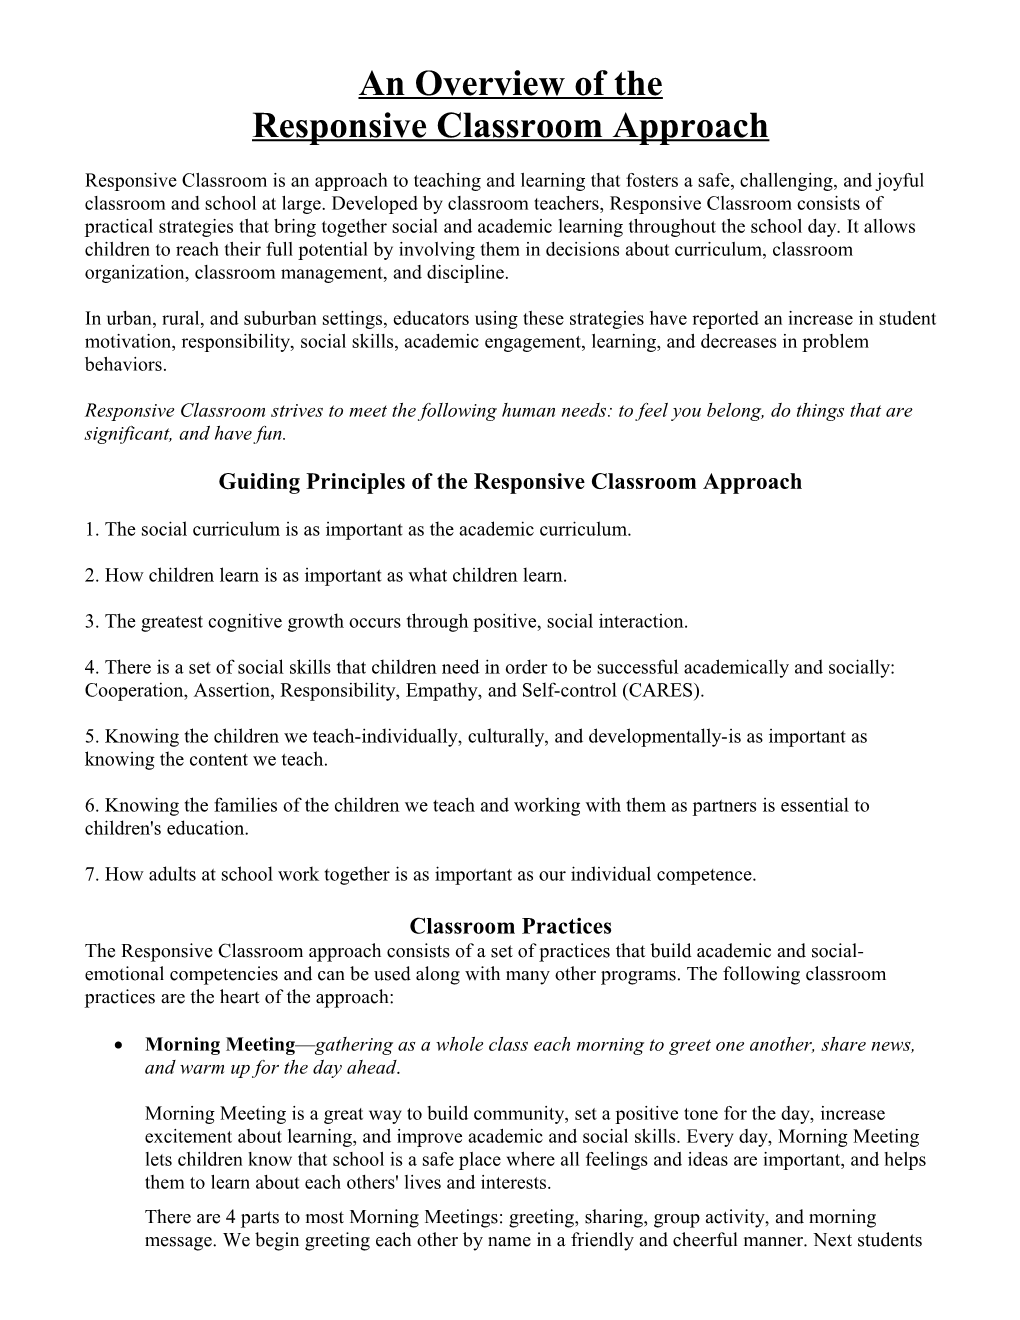 An Overview of the Responsive Classroom Approach